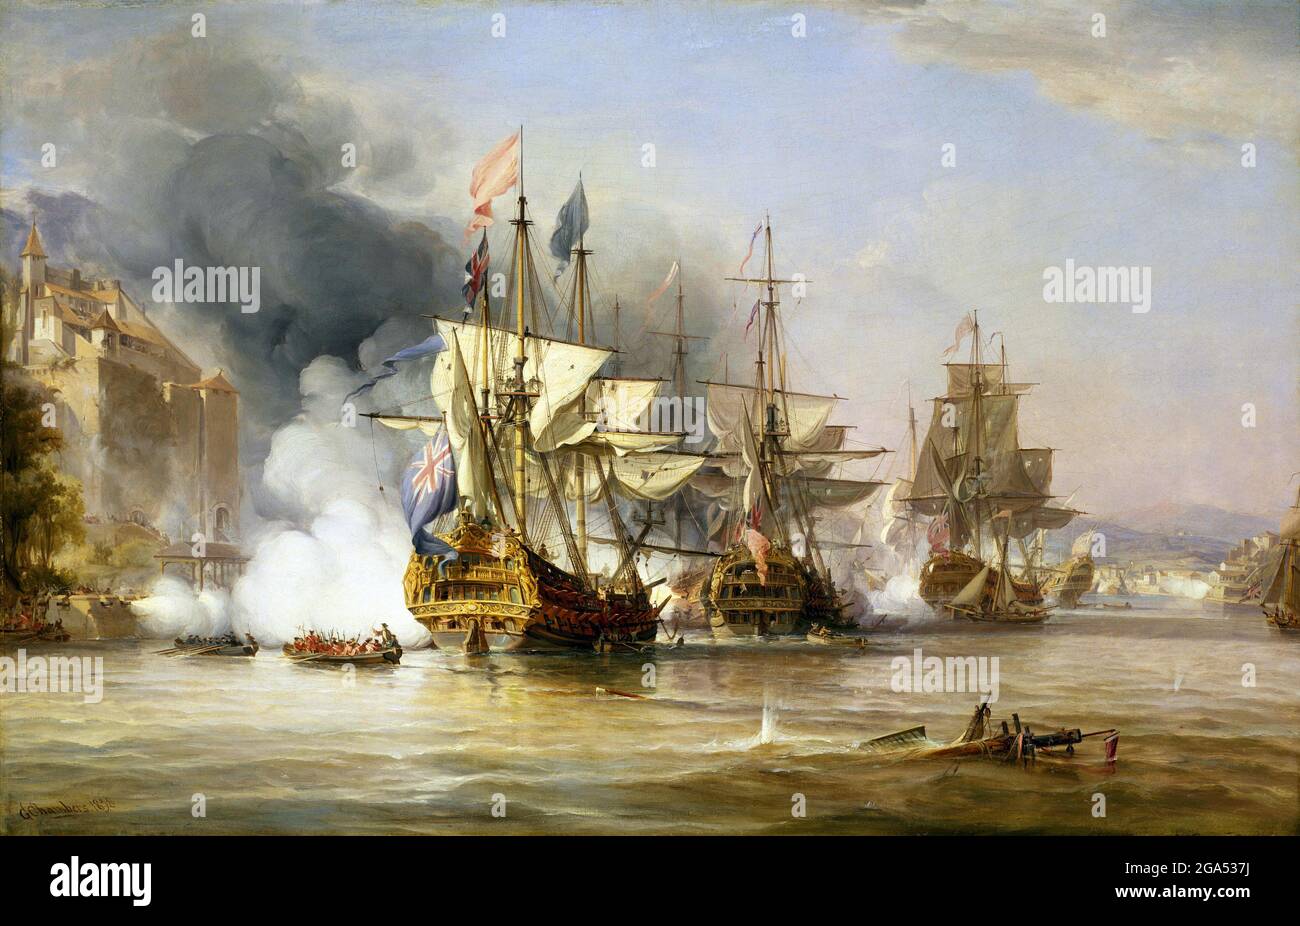 Panama: 'The Capture of Puerto Bello, 21 November 1739'. Oil on canvas painting by George Chambers Senior (1803-1840), 1838.  Portobello was founded in 1597 by Spanish explorer Francisco Velarde y Mercado. From the sixteenth to the eighteenth centuries it was an important silver-exporting port in New Granada on the Spanish Main and one of the ports on the route of the Spanish treasure fleets. It was attacked on November 21, 1739, and captured by a British fleet, commanded by Admiral Edward Vernon during the War of Jenkins' Ear. Stock Photo